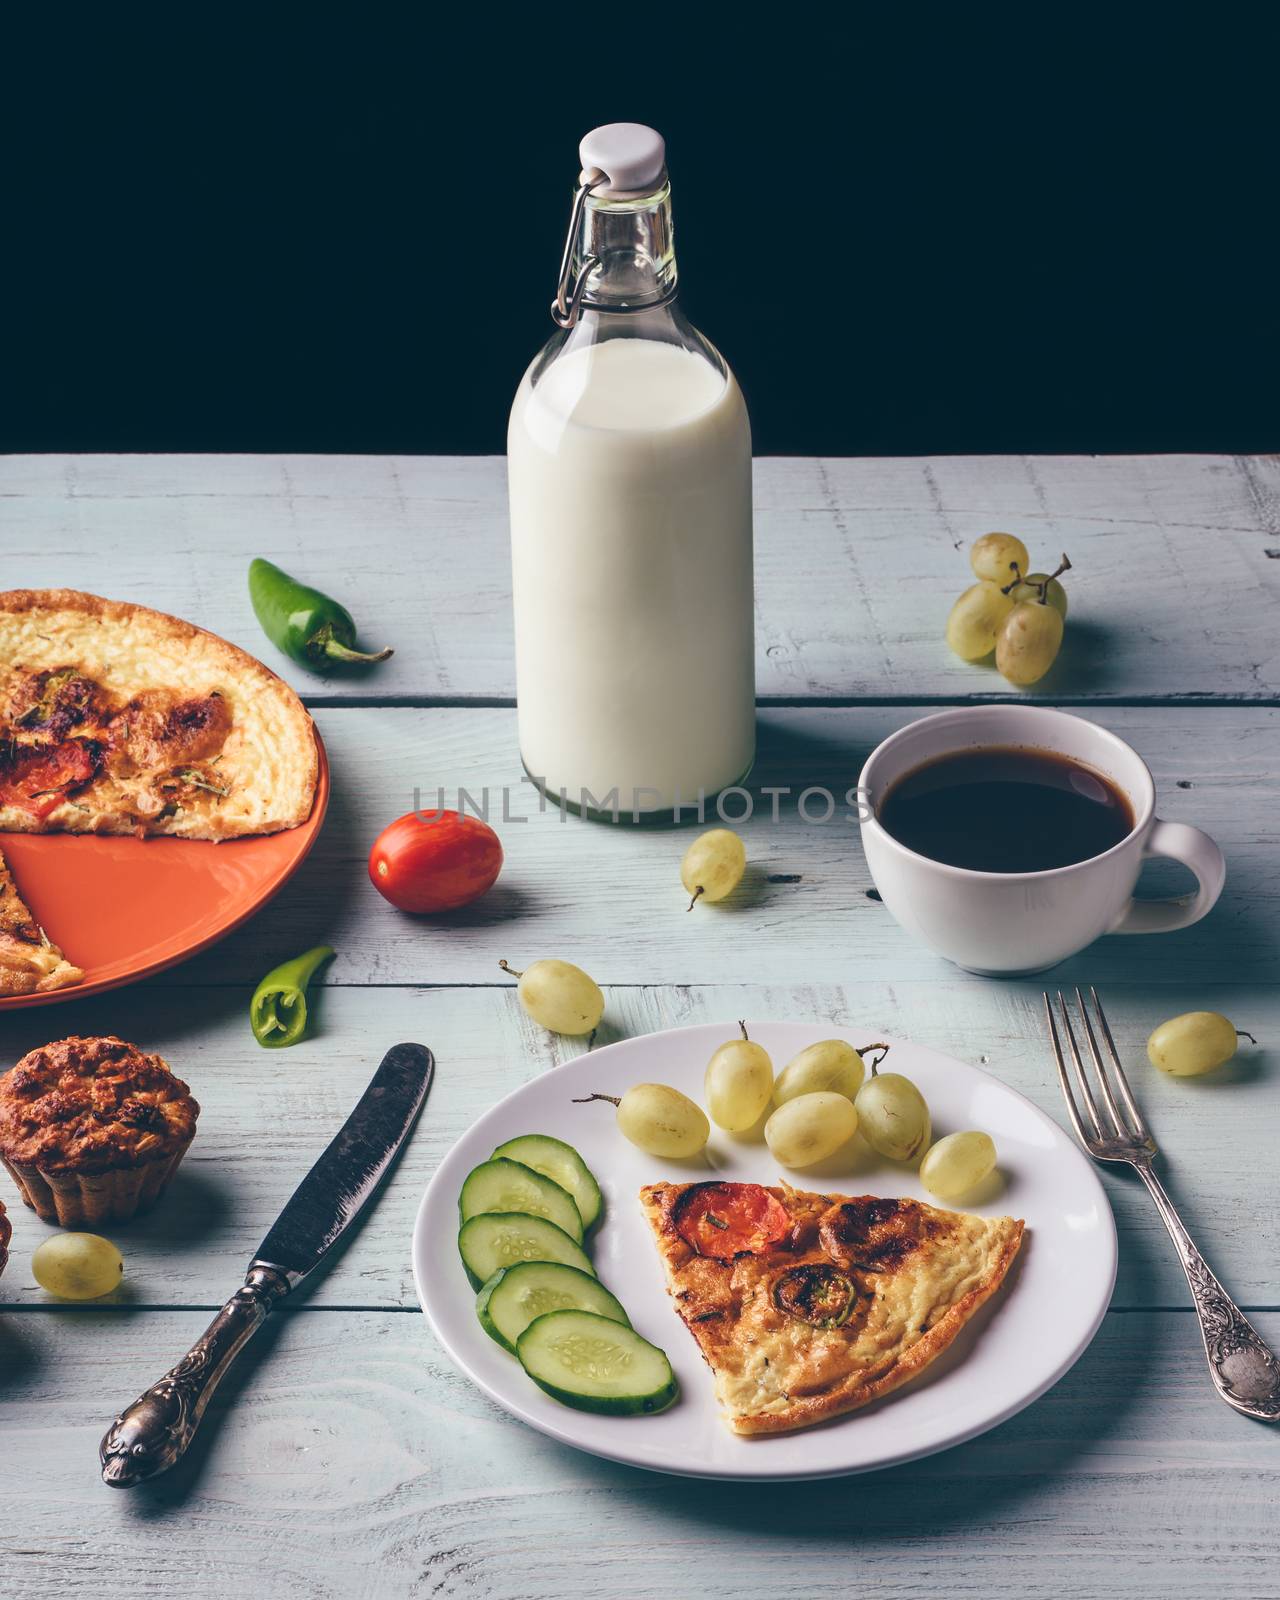 Healthy breakfast with frittata, fruits, vegetables, milk, cup of coffee and muffins on light wooden background.